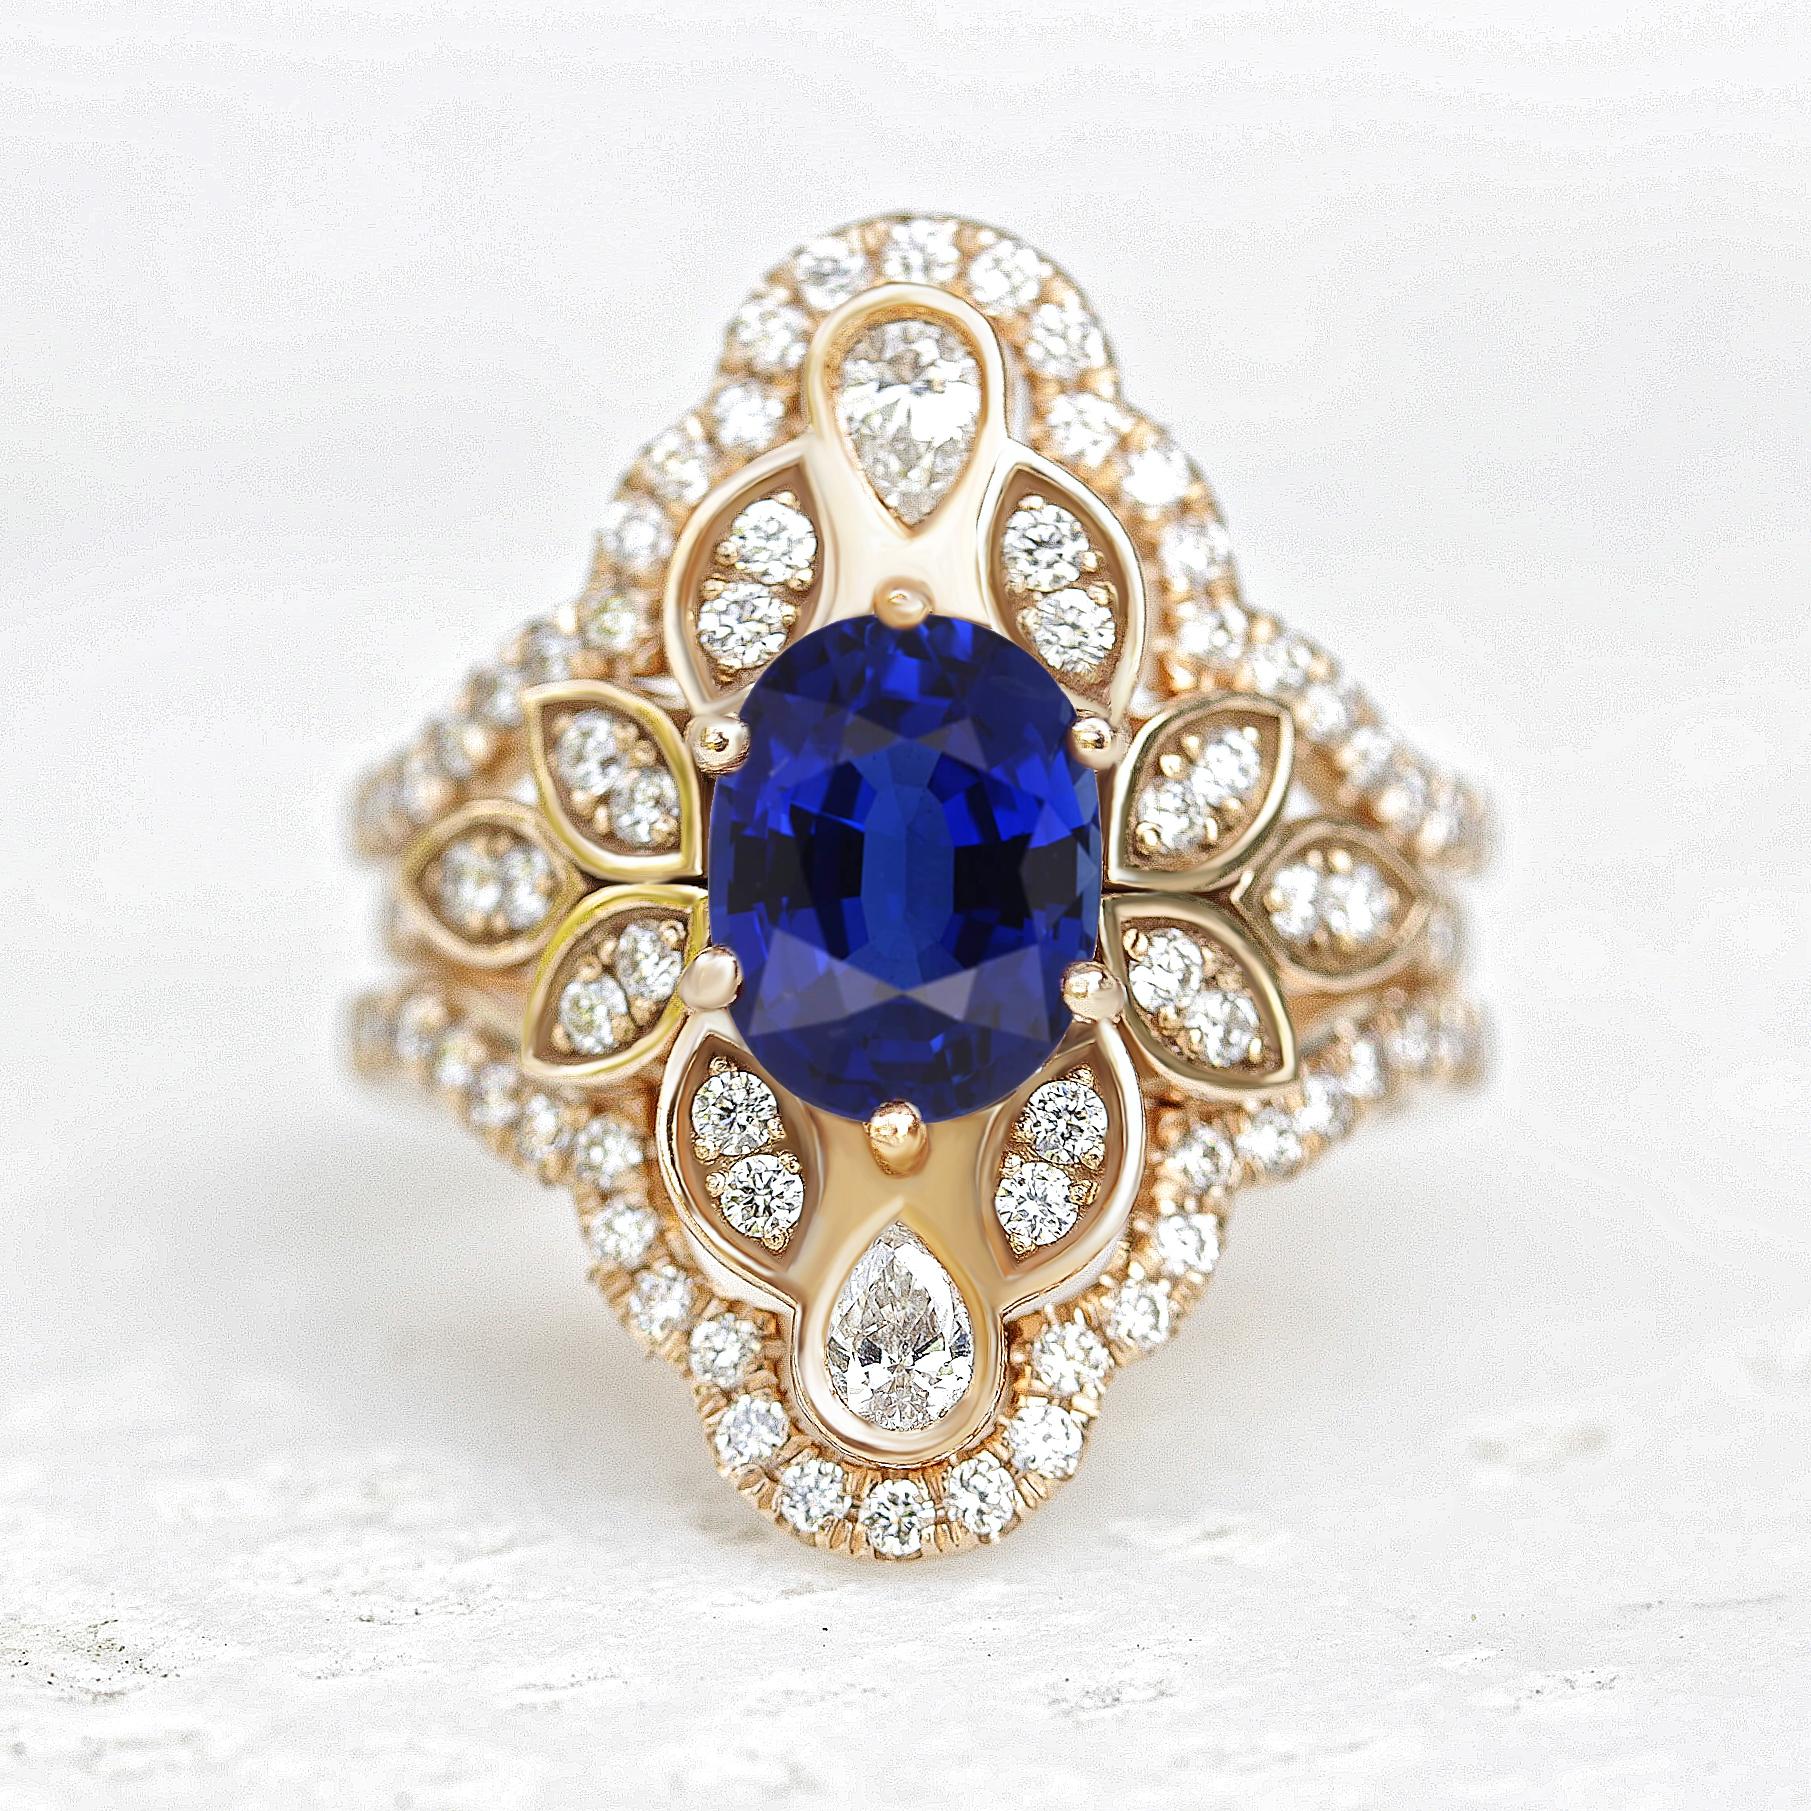 This engagement ring set is remarkable, featuring a center stone in the form of an oval-shaped blue sapphire - the traditional September birthstone - decorated with art nouveau leaf ornaments and two pear-shaped diamonds. This vintage-inspired lily